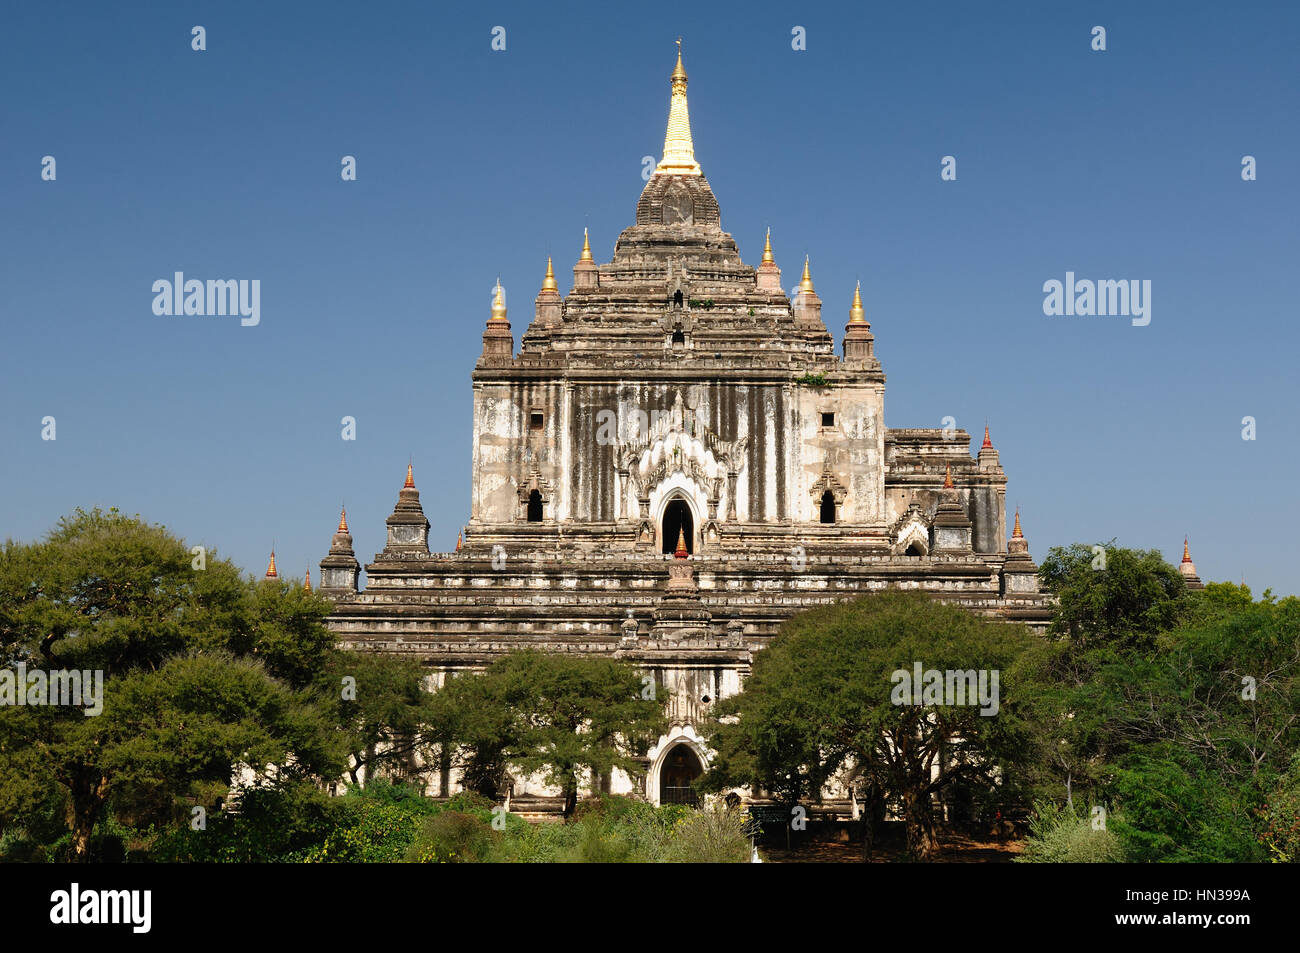 Myanmar (Burma), Bagan, Thatbyinny Pahto Temple - Bagan's highest temple is built of two  white-coloured boxy storeys. Built in 1144 by Alaungsithu. Stock Photo